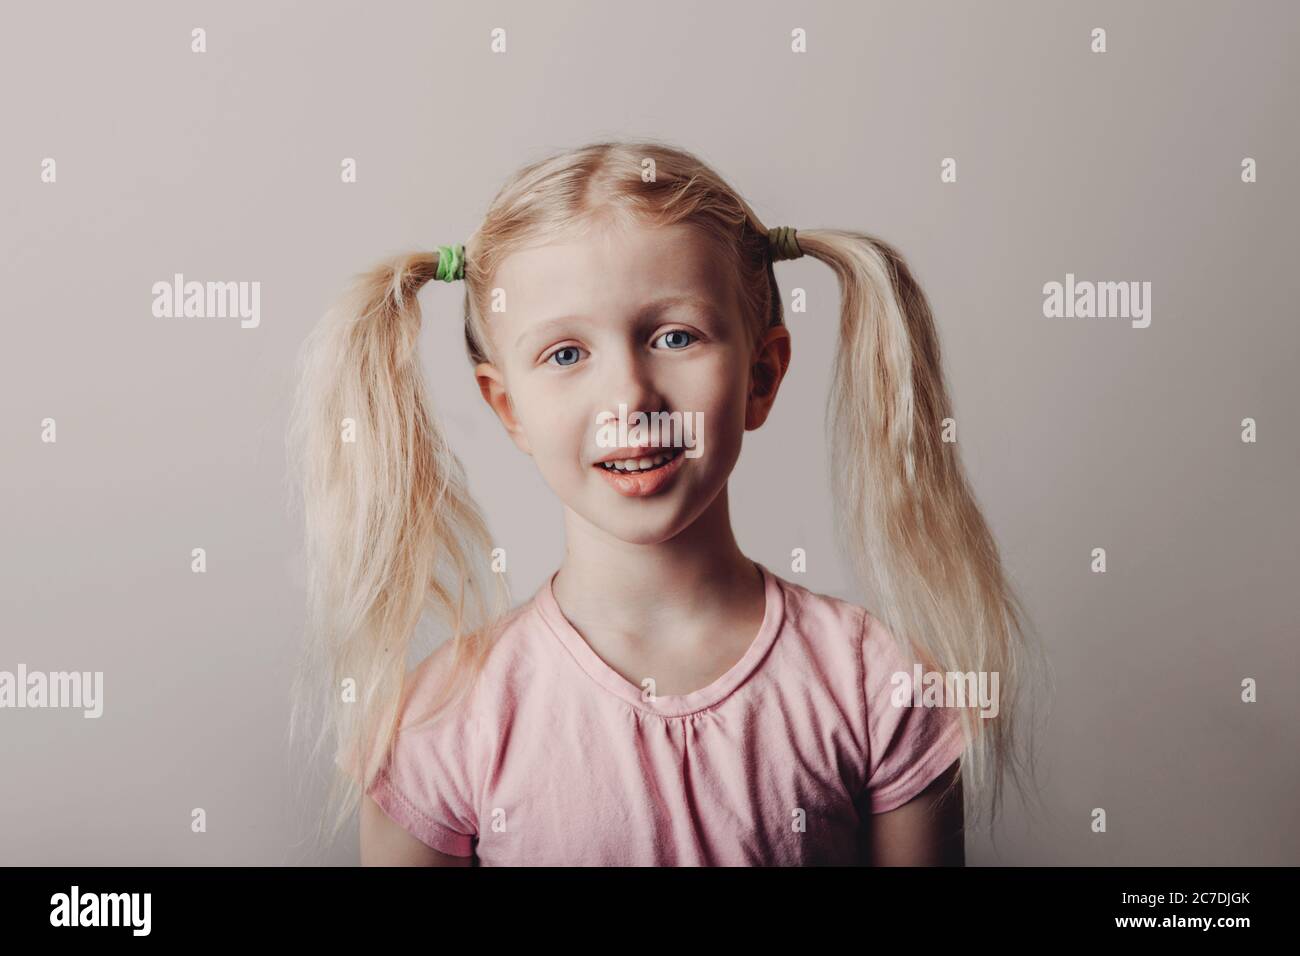 Closeup portrait of surprised sad blonde Caucasian preschool girl in pink t-shirt on light background. Child with long pig tails hair posing Stock Photo